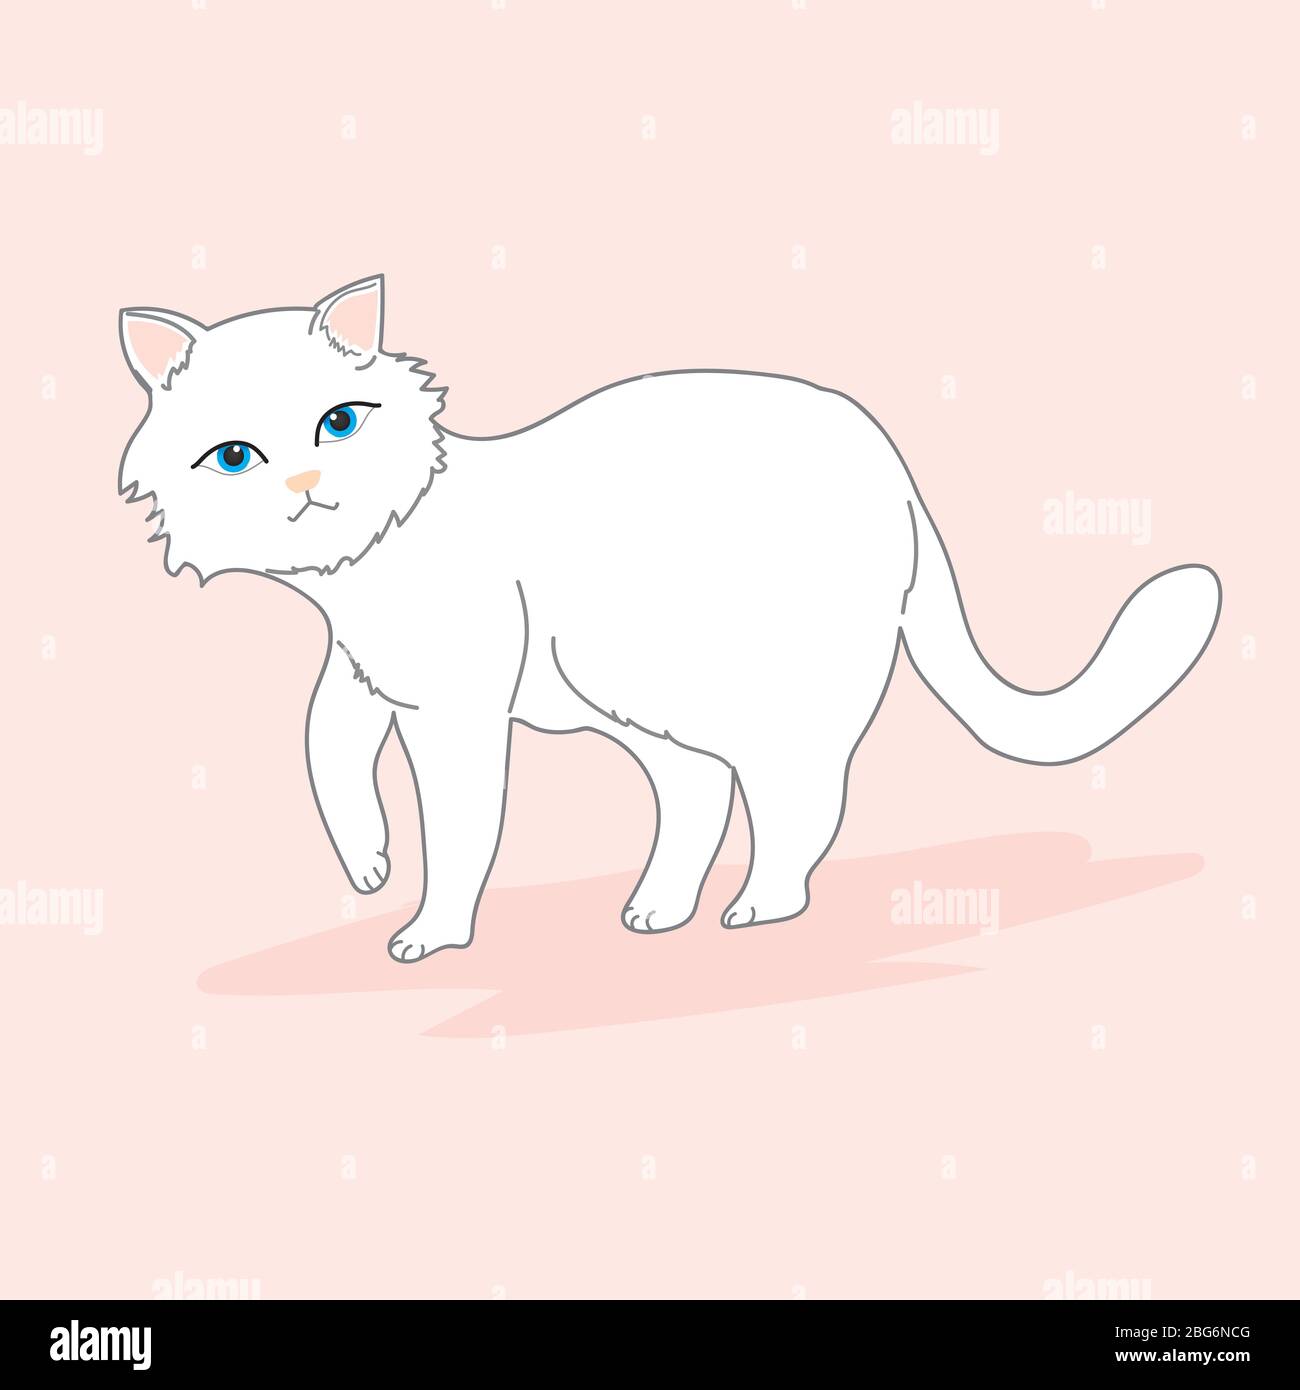 Cat Illustration clipart. Cute white cat is walking. It has blue eyes and a pale pink nose. It's on a light coloured floor. Hand draw art. Stock Vector